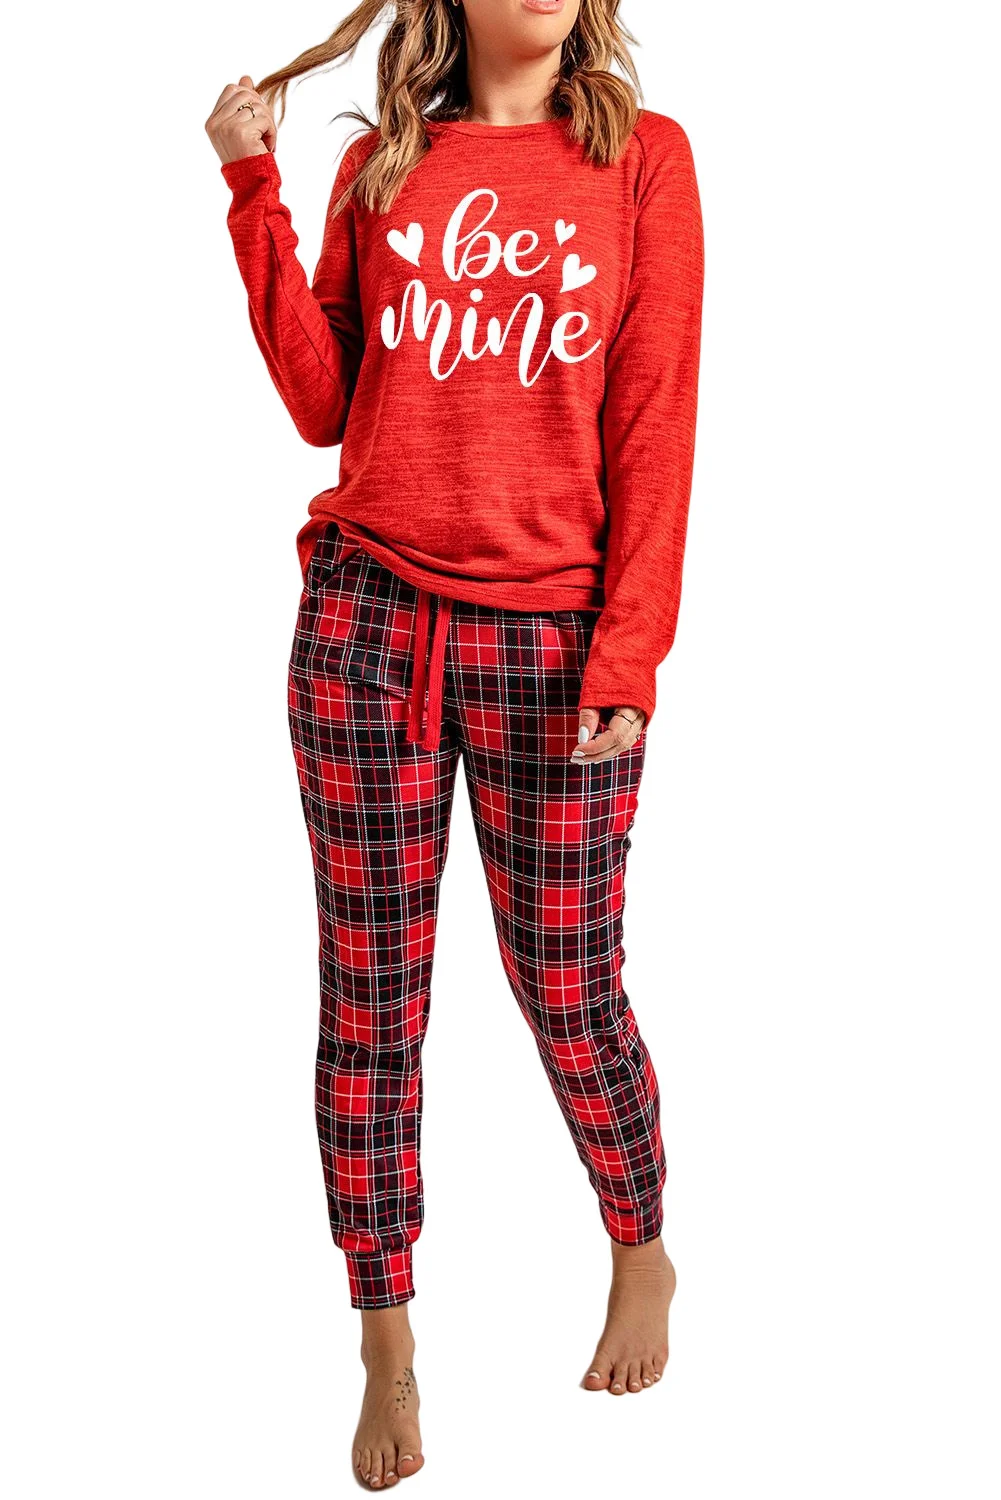 Red Heart Letter Print Long Sleeve Top and Plaid Pants Loungewear